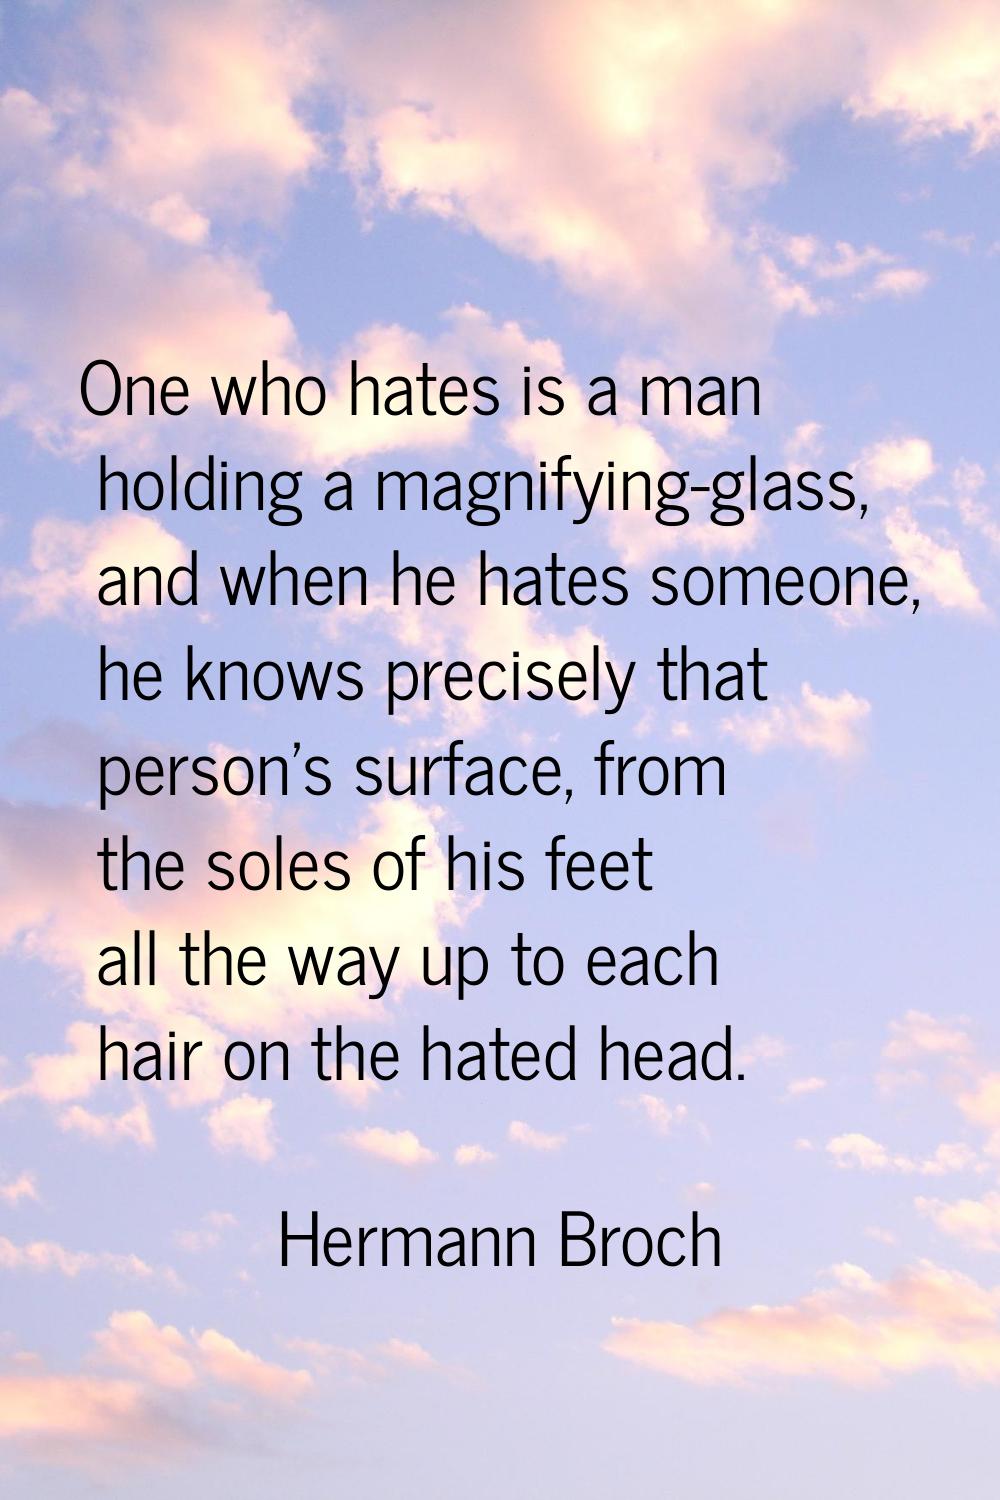 One who hates is a man holding a magnifying-glass, and when he hates someone, he knows precisely th